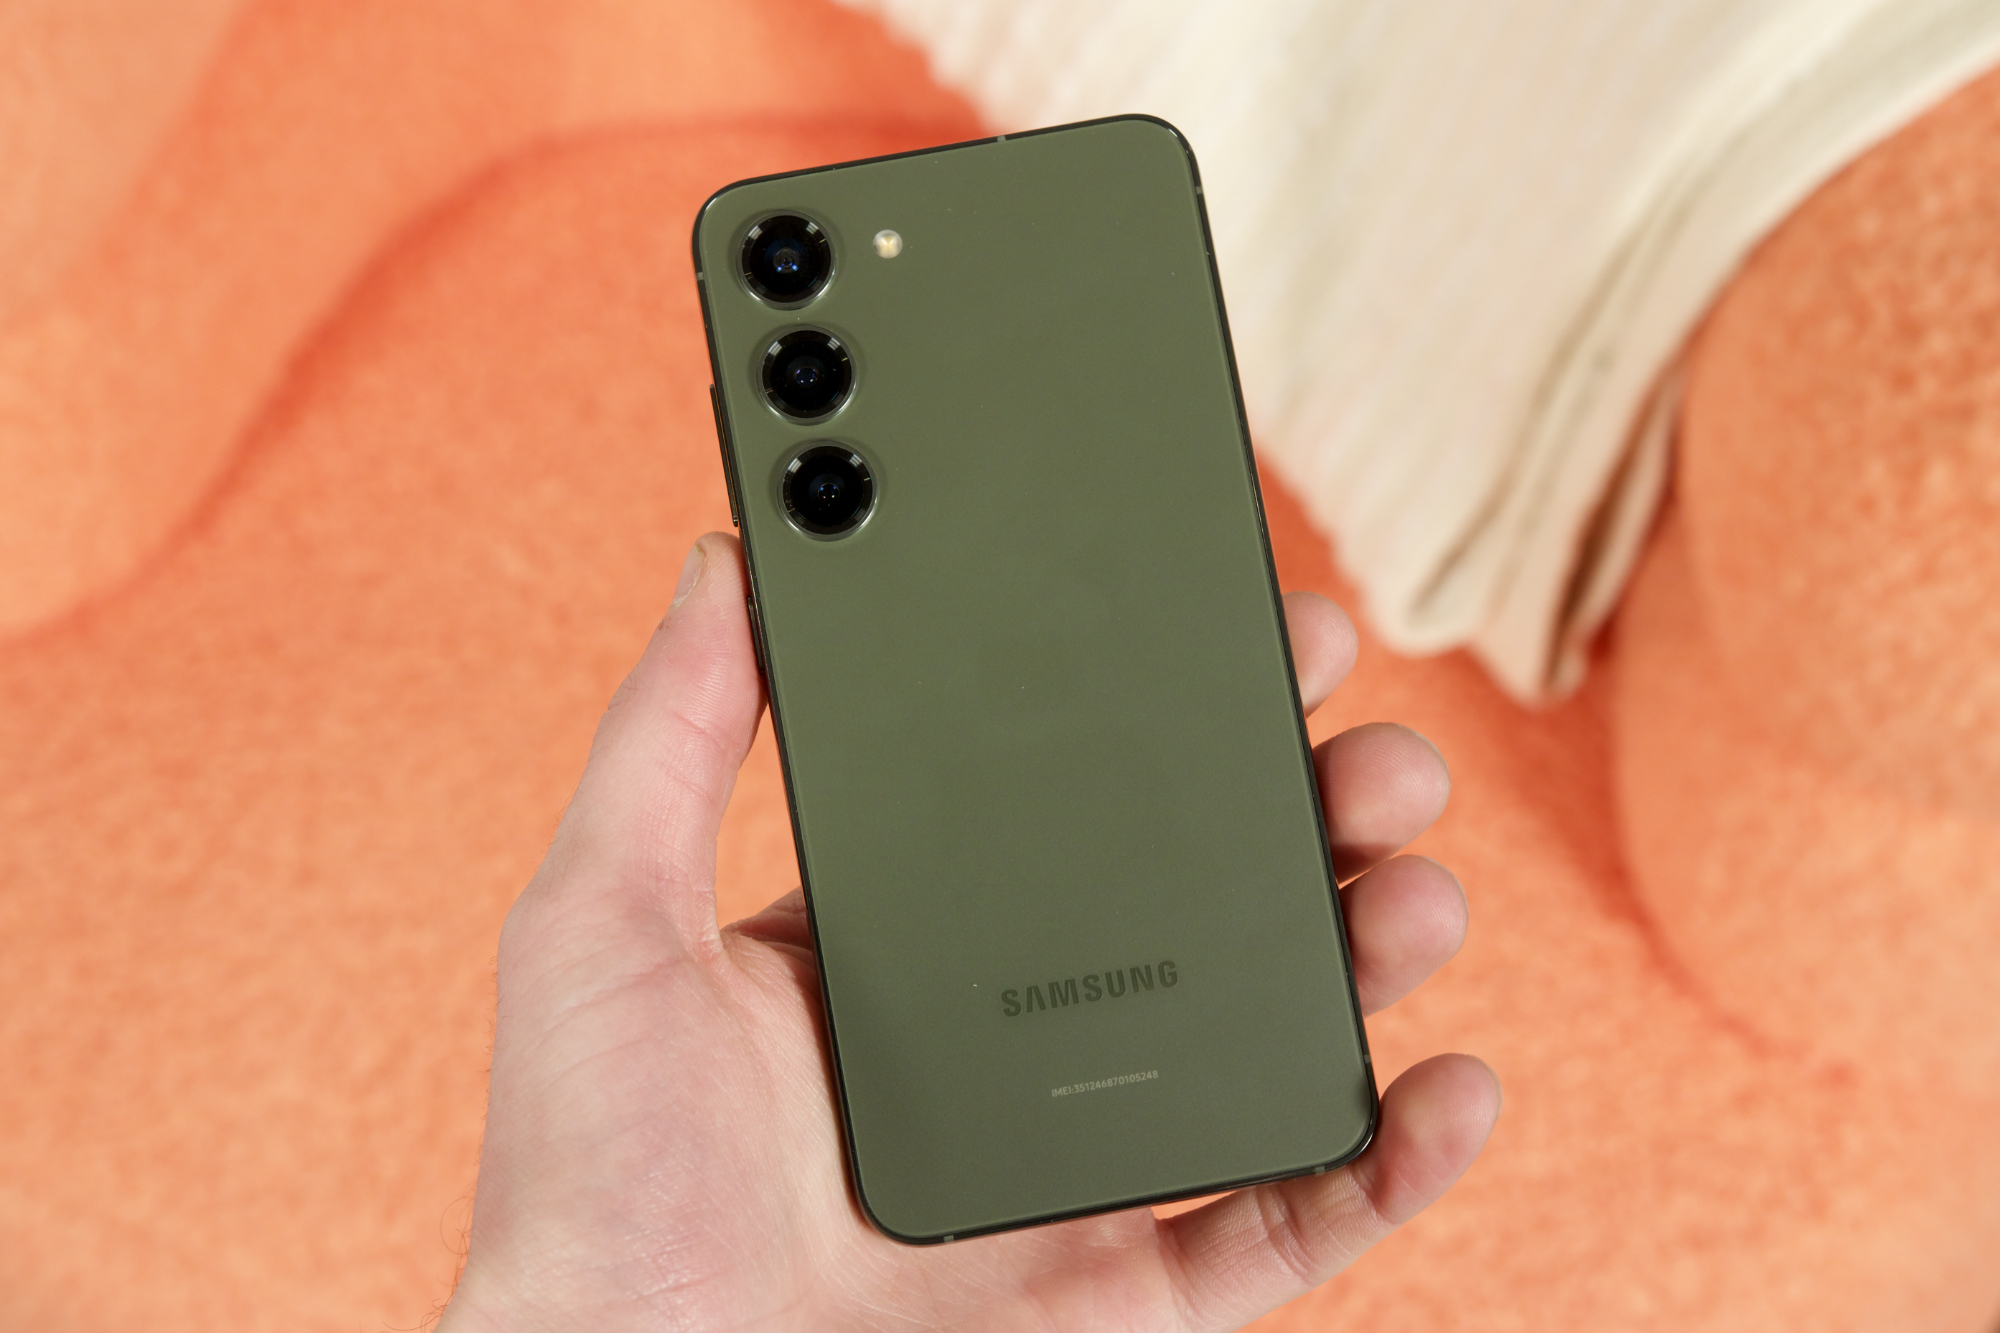 Samsung Galaxy S23 FE 5G Rumoured to Comes With Snapdragon 8 Gen 1